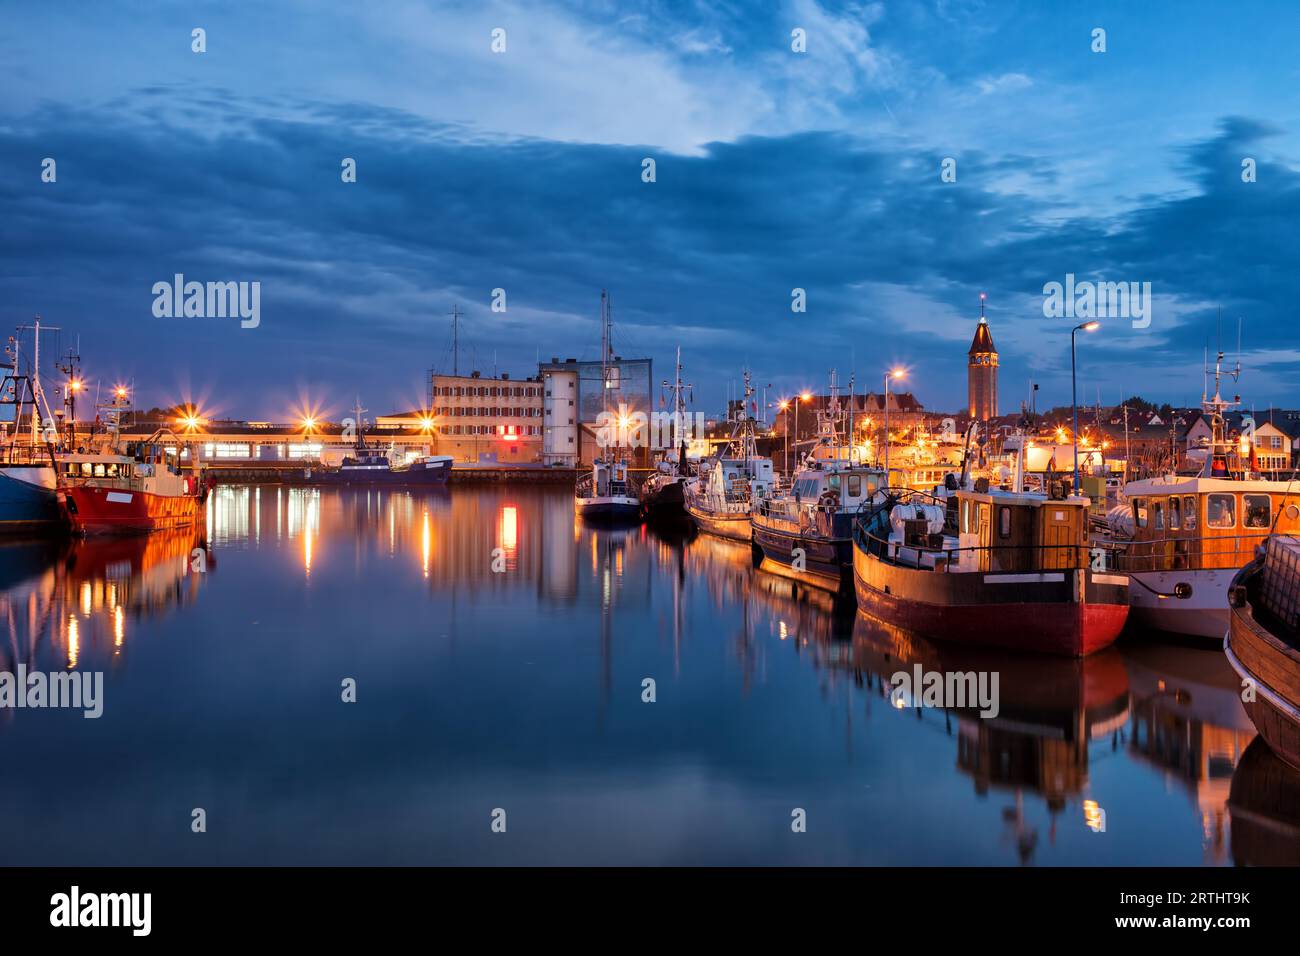 Port in Wladyslawowo town in Poland at night, fishing ships and boats and city skyline Stock Photo